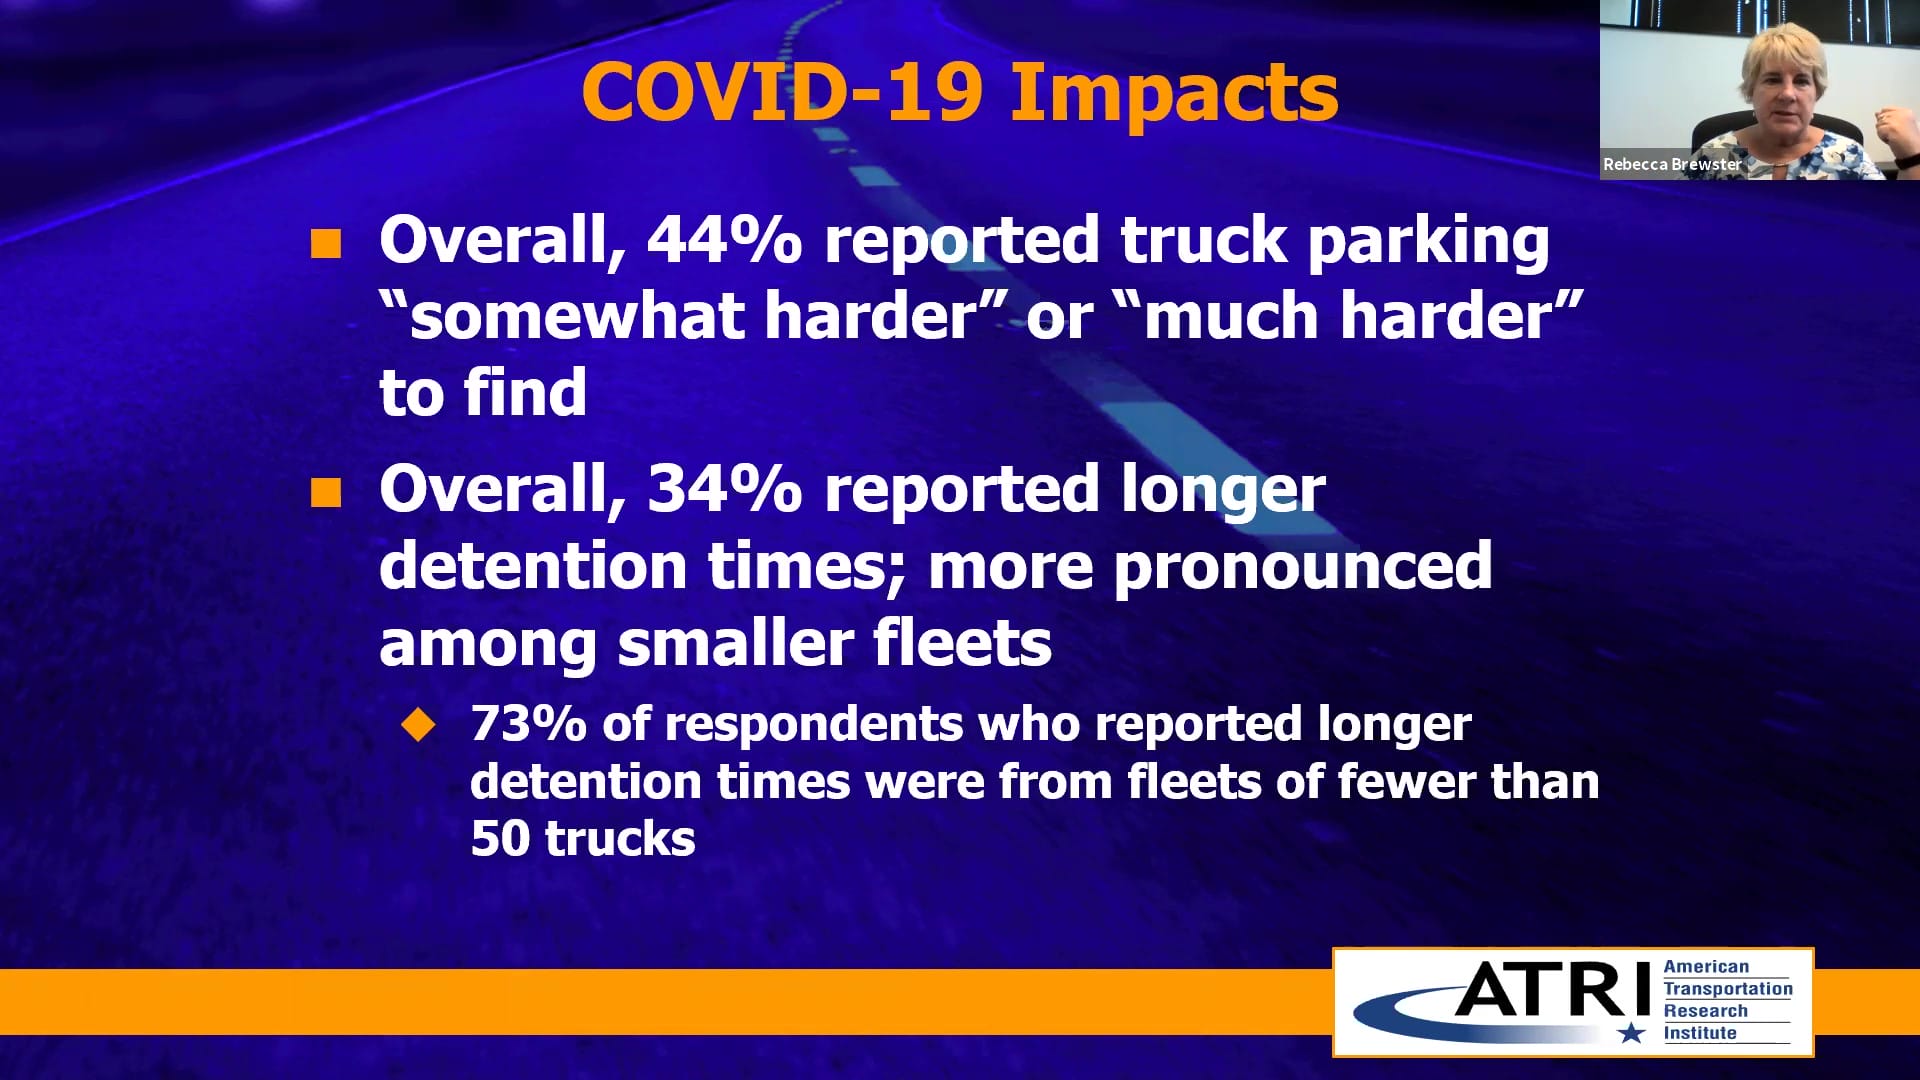 Trucking Industry Concerns 2020 from ATRI COVID-19 Overall Impacts